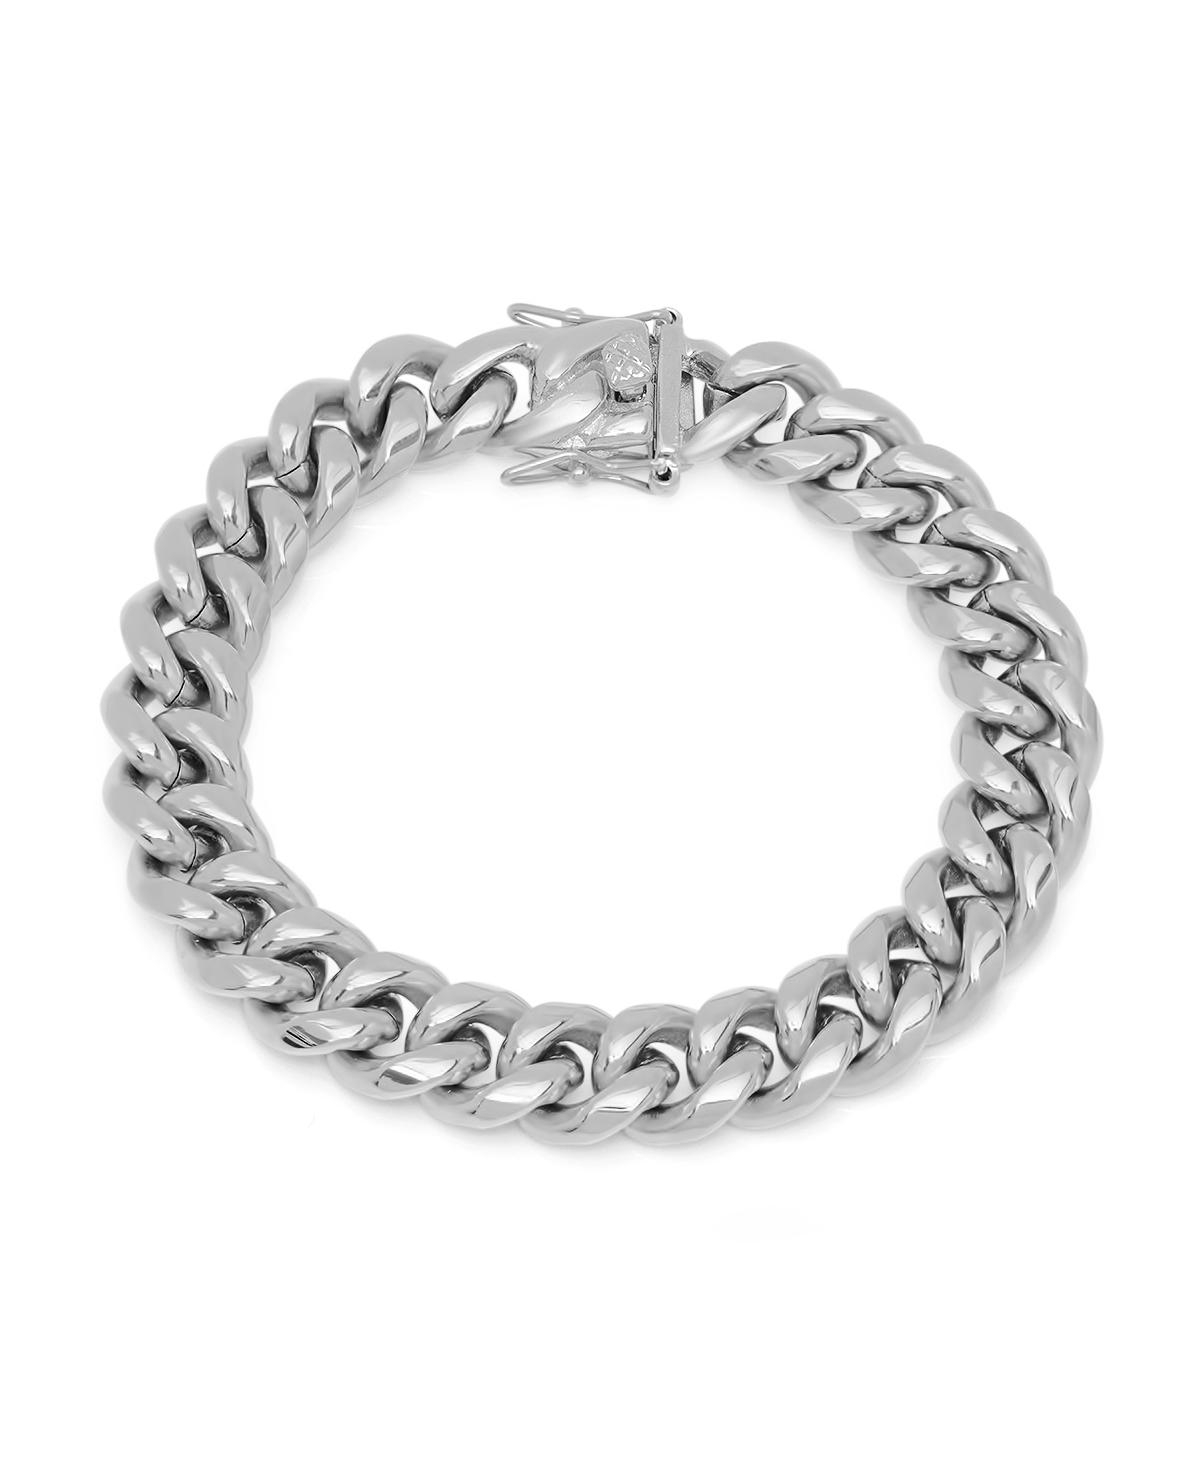 Men's Stainless Steel Miami Cuban Chain Link Style Bracelet with 12mm Box Clasp Bracelet - Silver